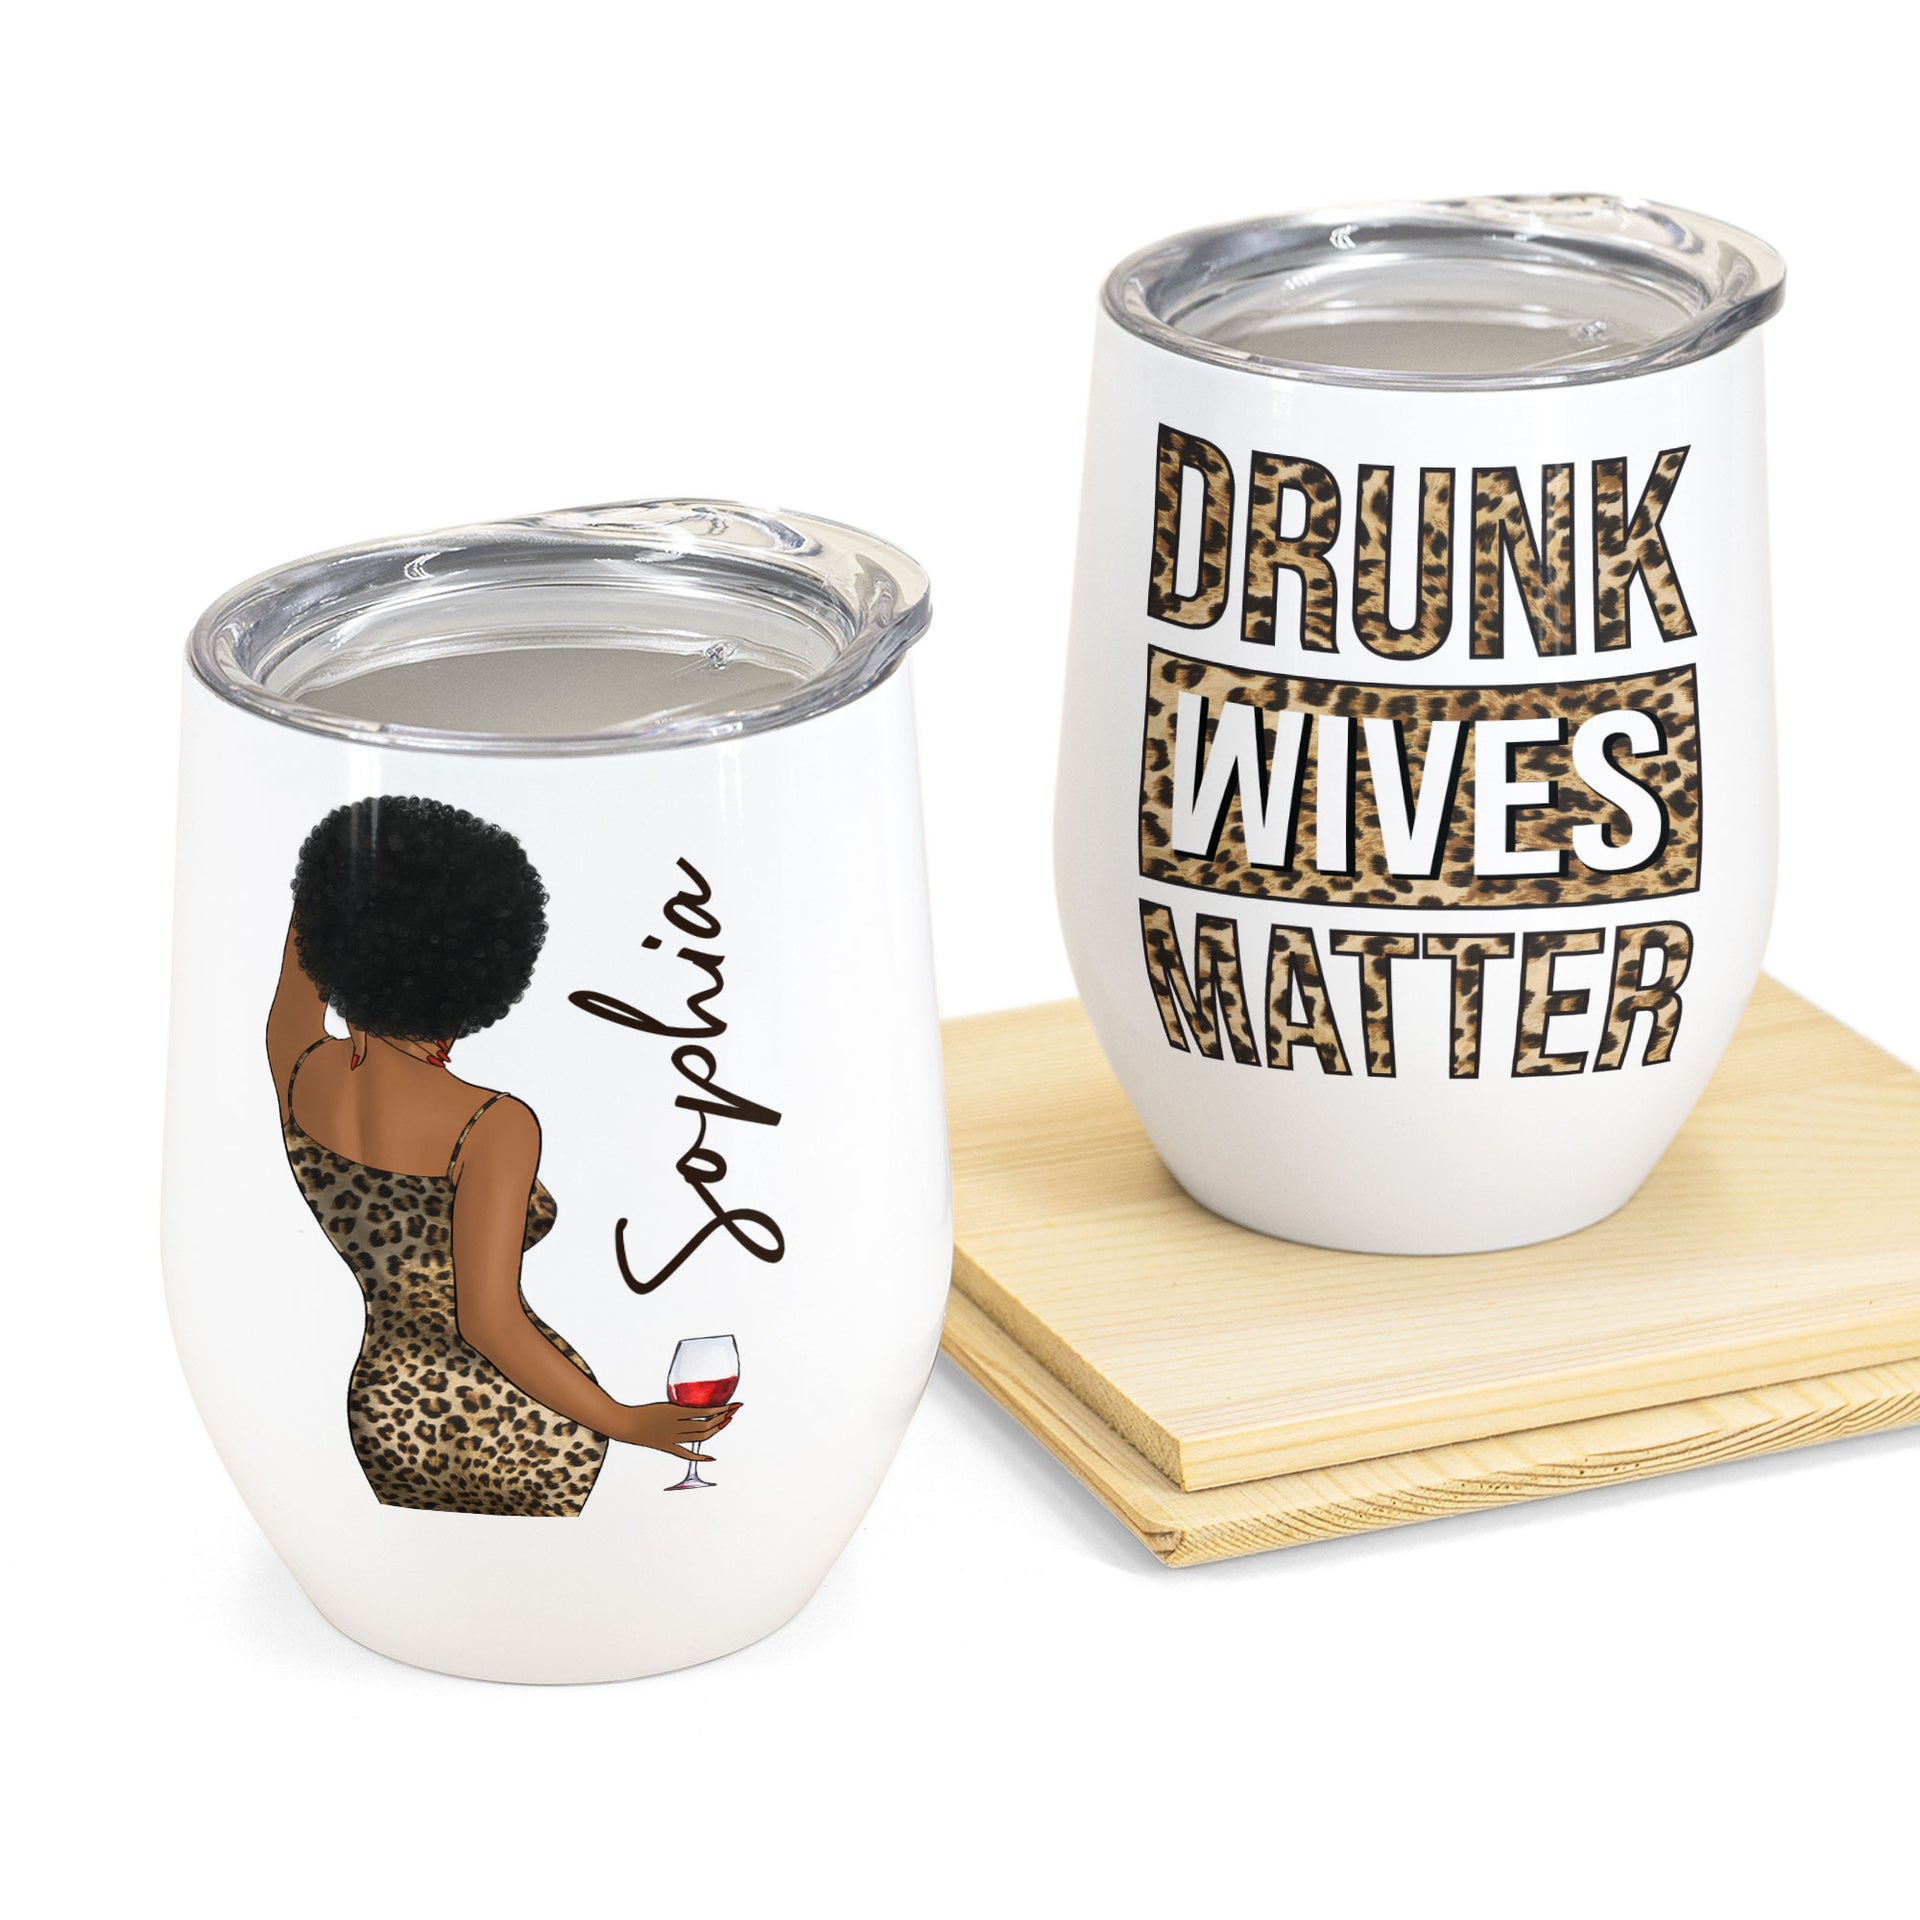 Derby Tumbler Gift Box, Wine Tumblers, Talk Derby to Me Banner, Patty B'zz